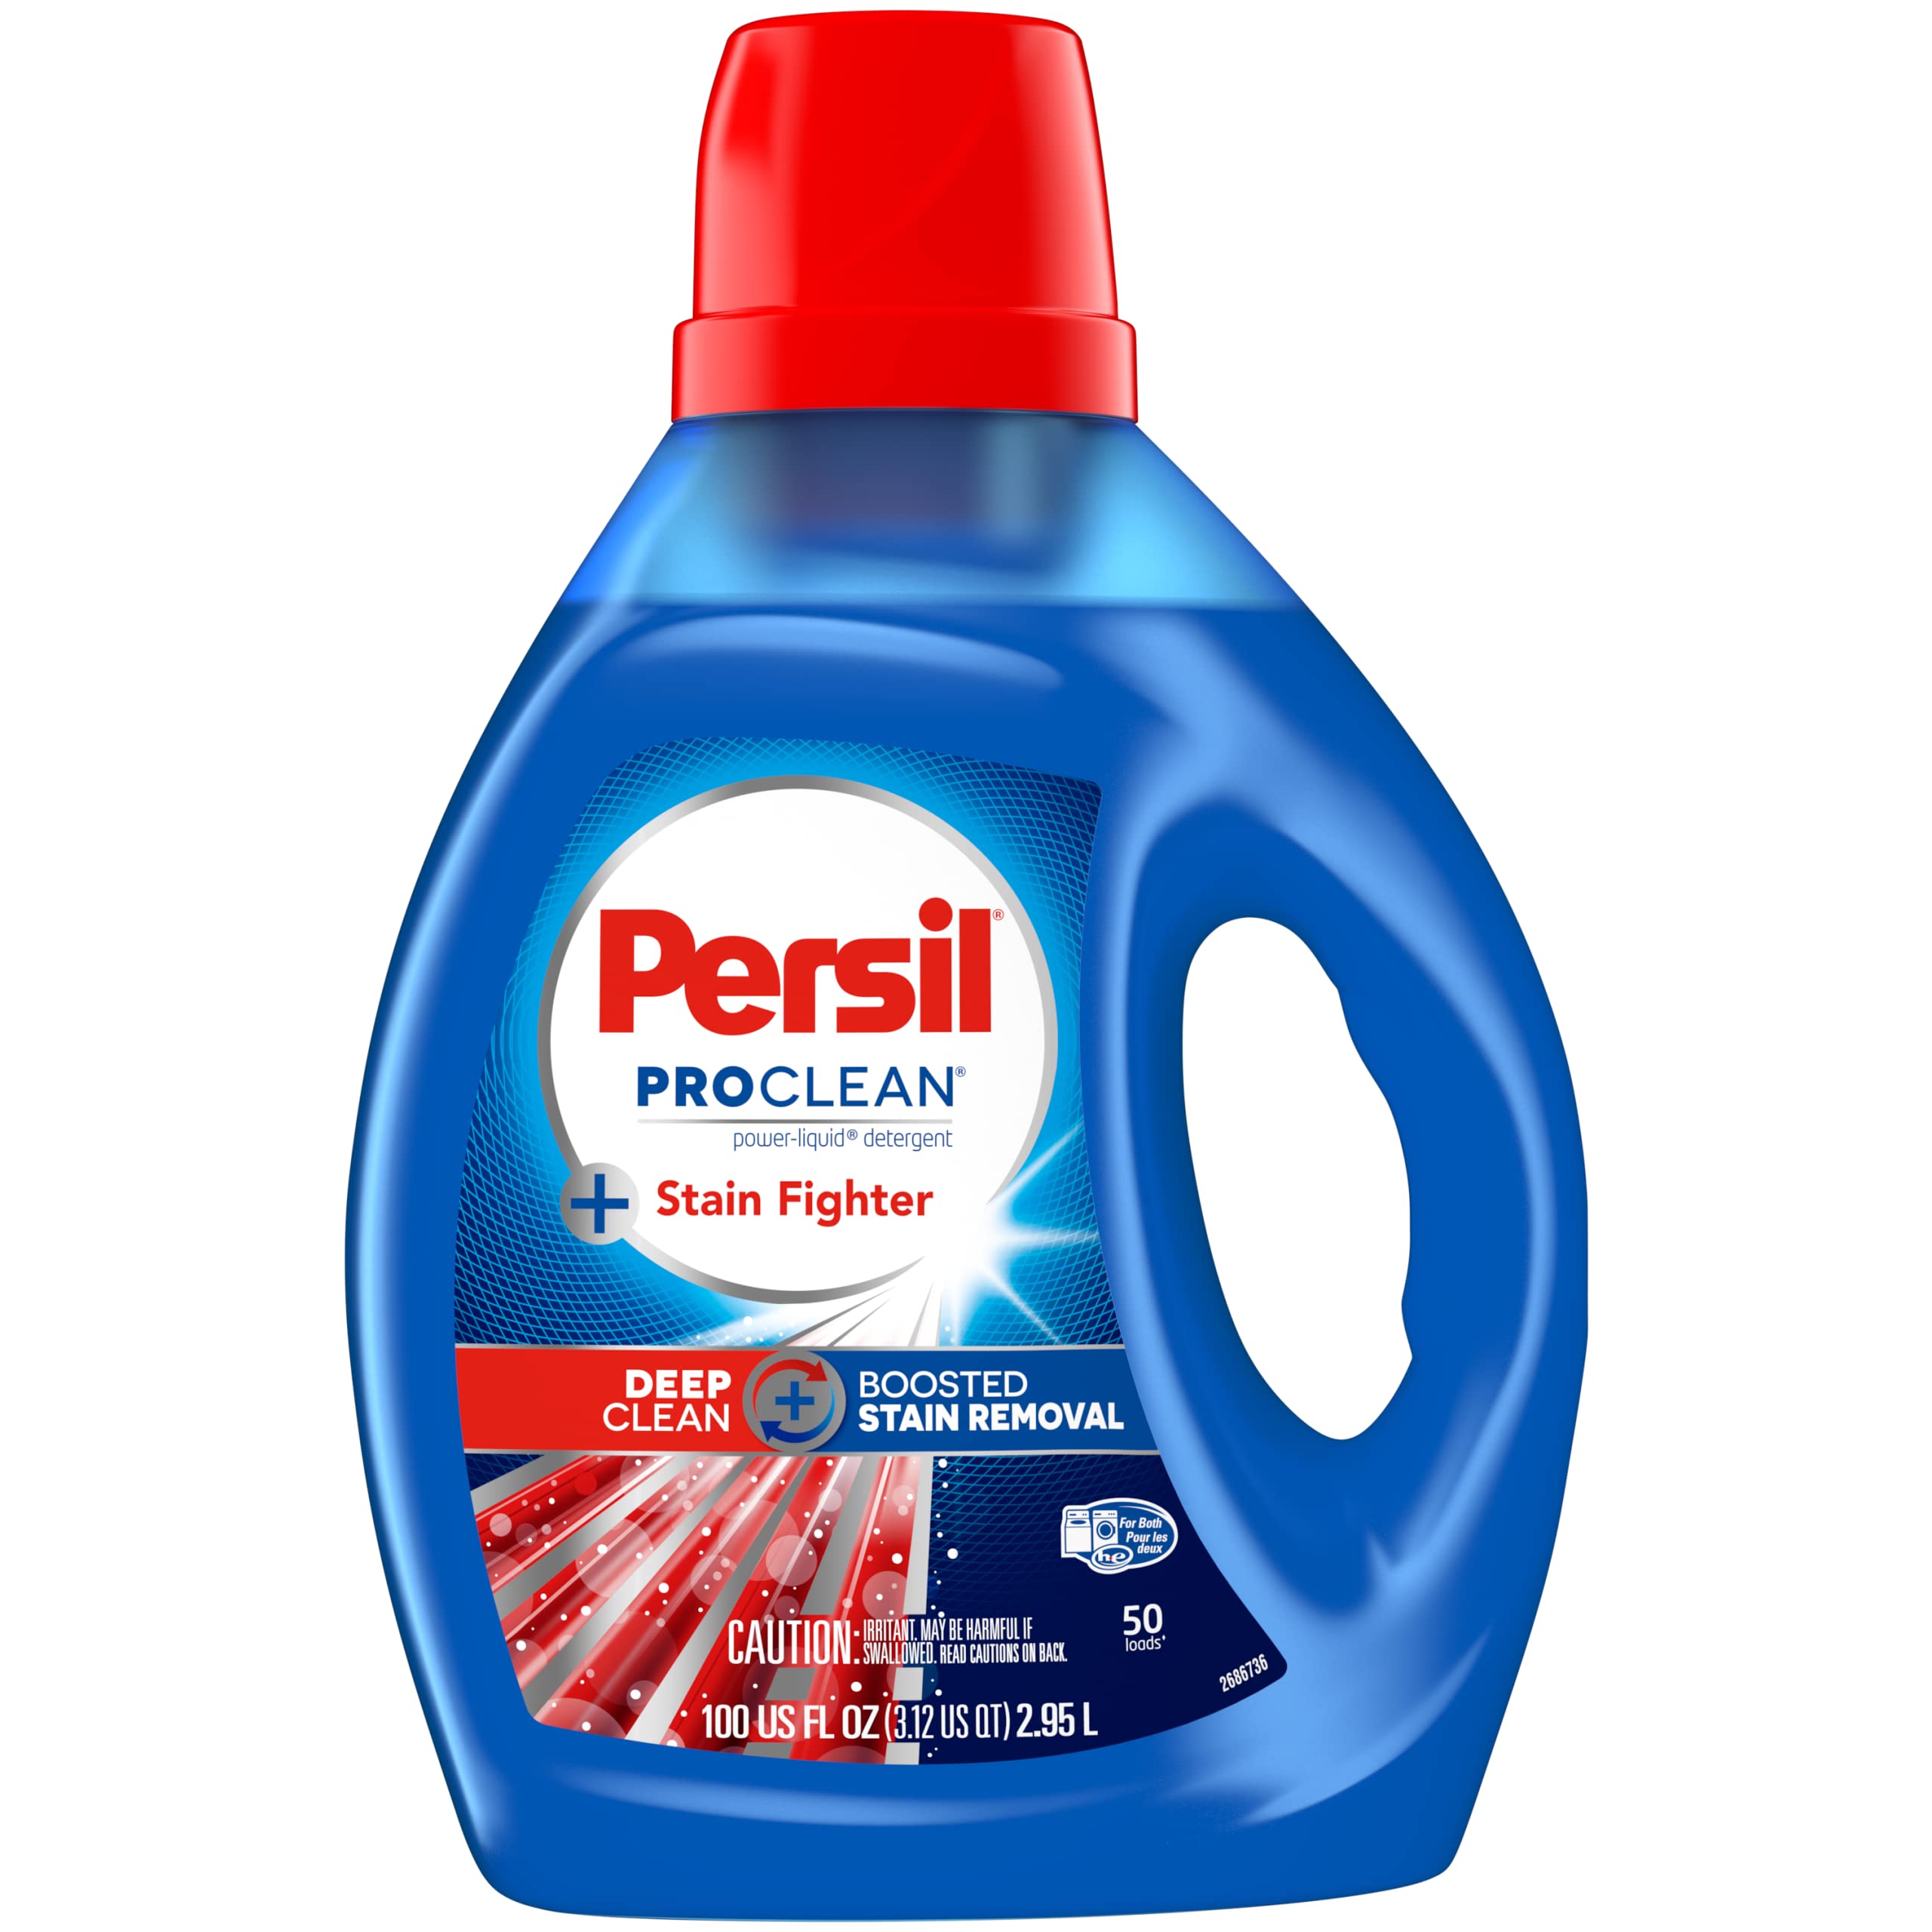 Persil ProClean + Stain Fighter Liquid Laundry Detergent